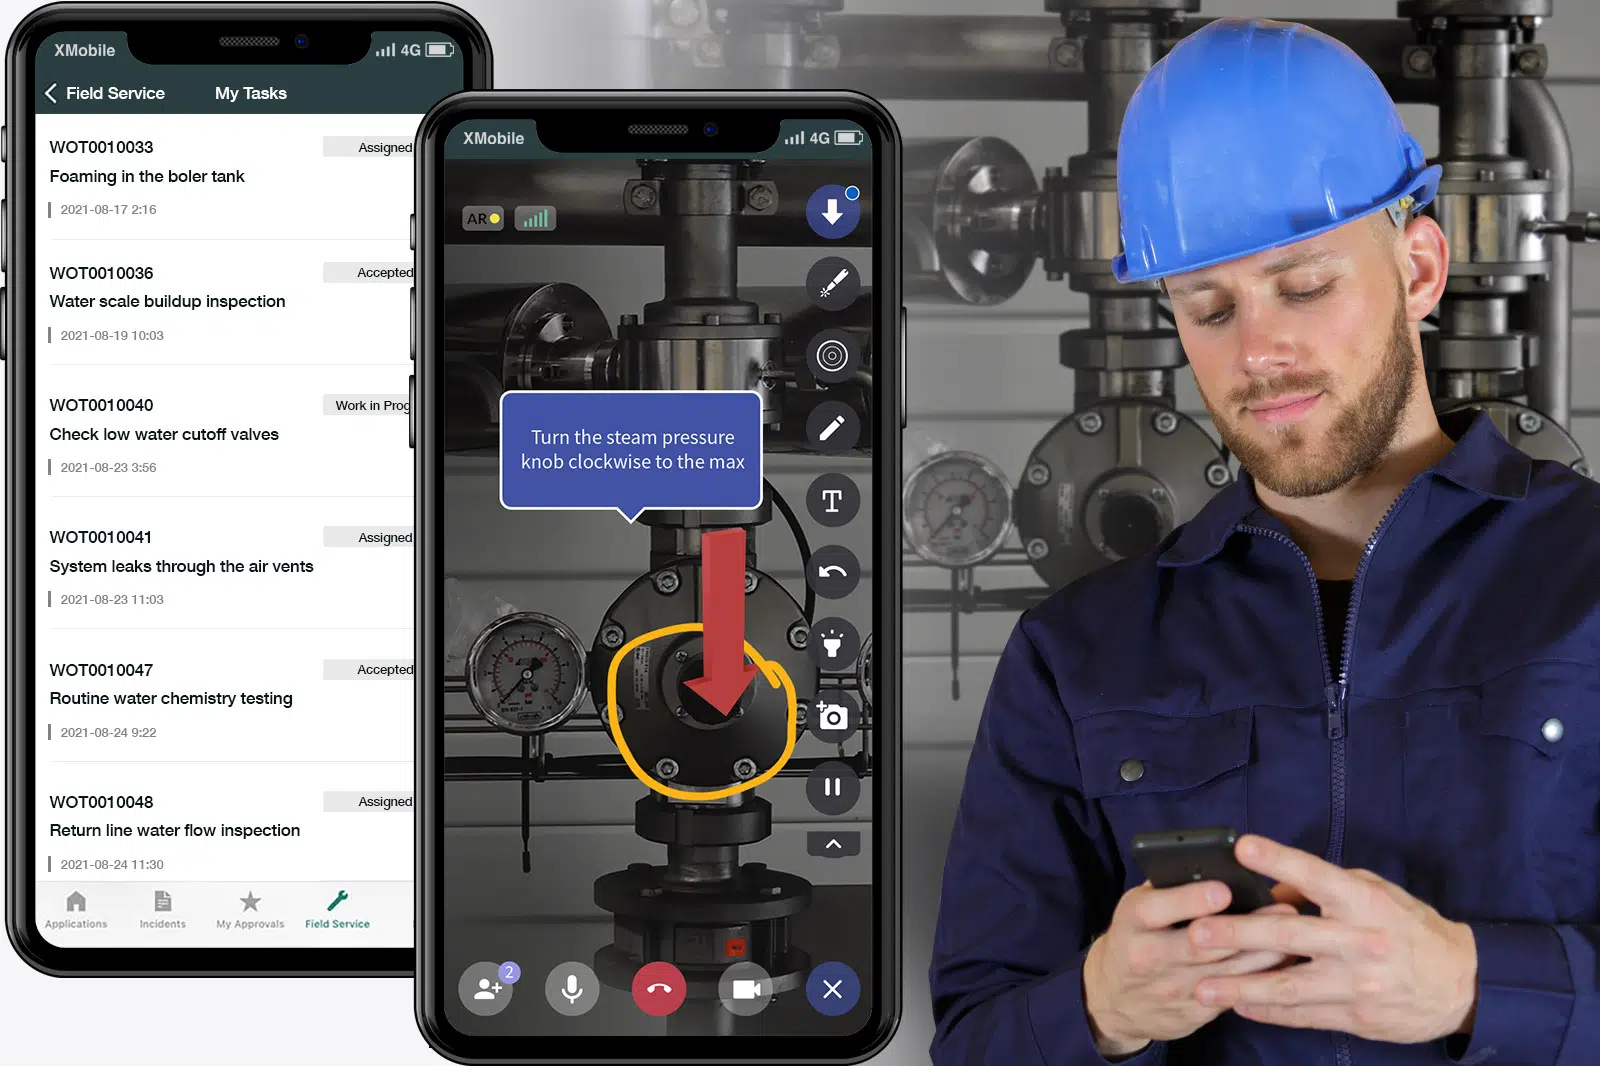 AR for ServiceNow Field Service